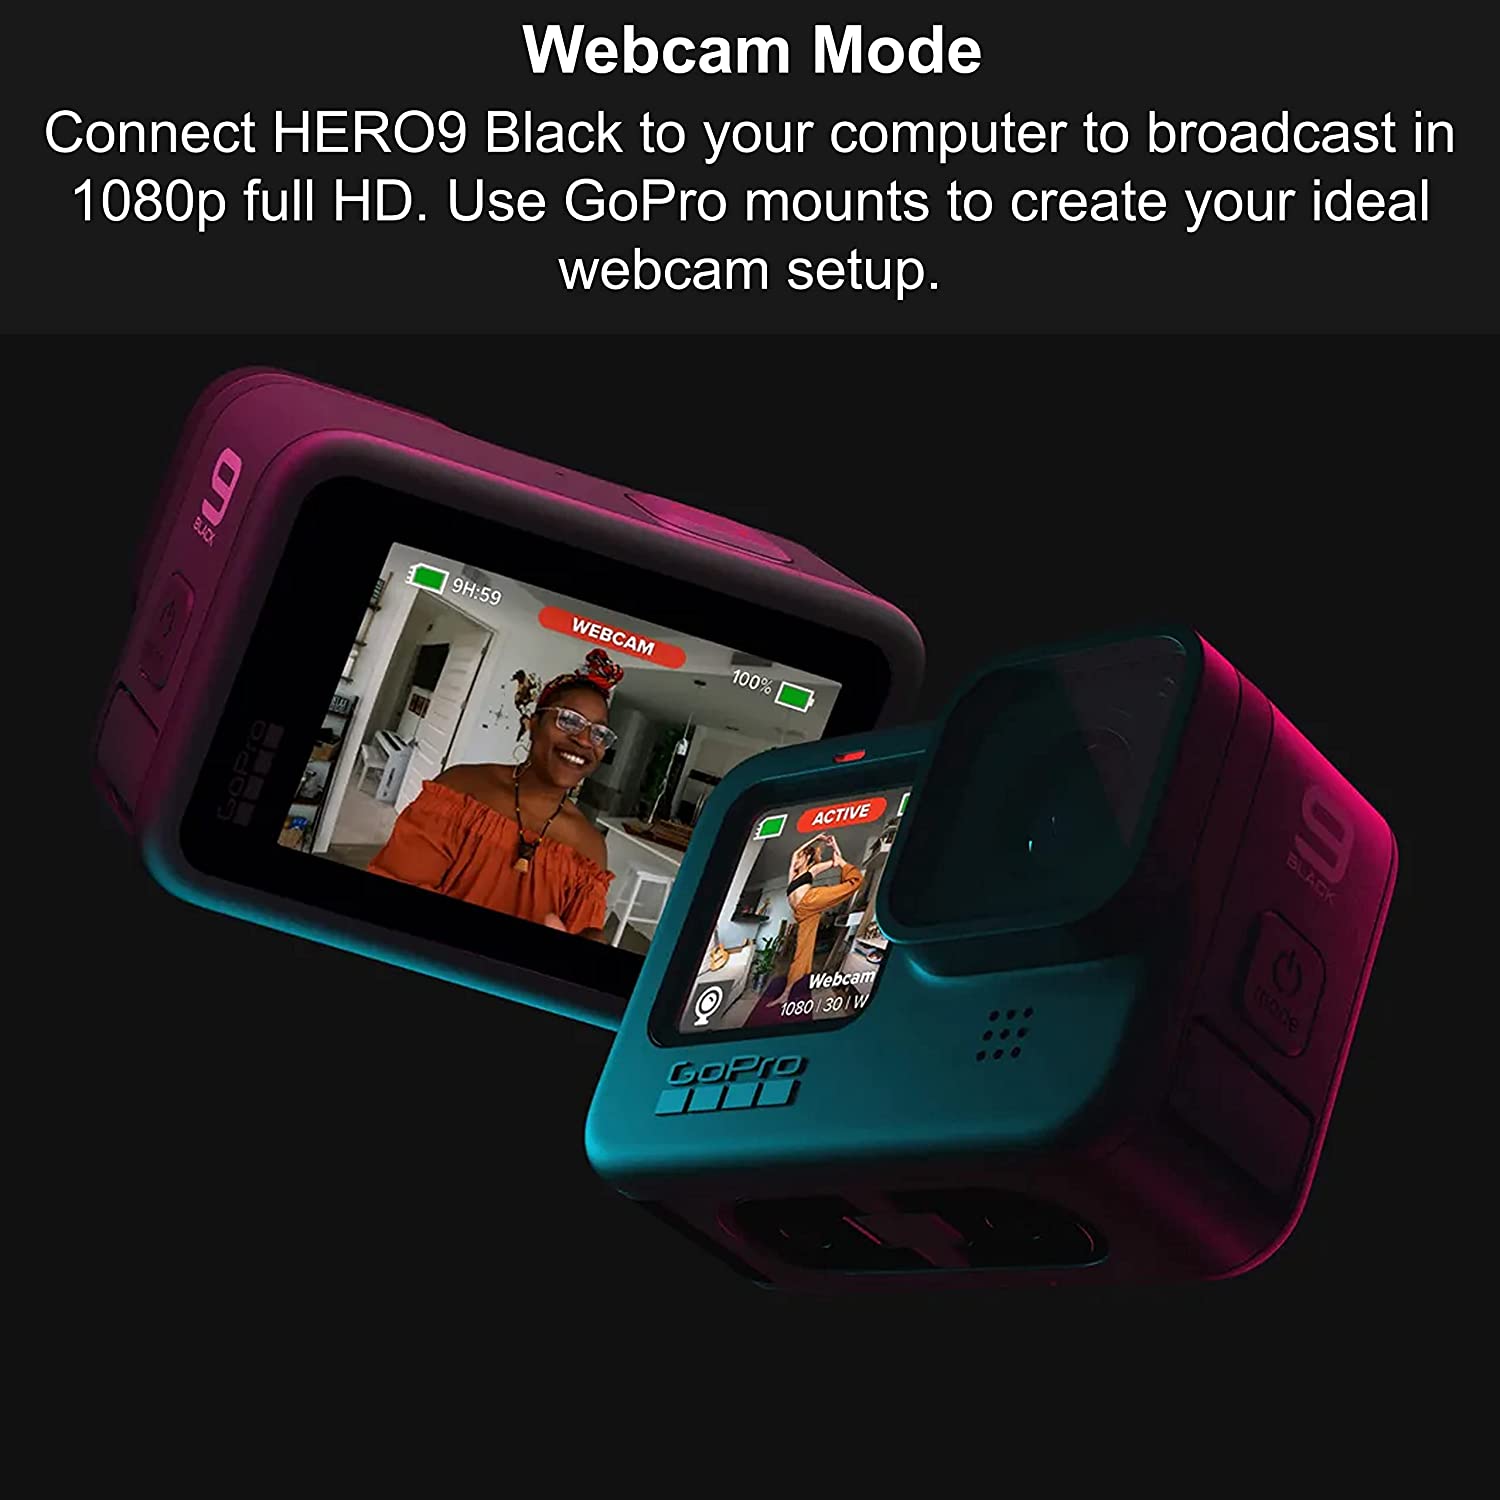 A front and back view of the GoPro Hero 9. The text says, 'Webcam Mode. Connect Hero9 Black to your computer to broadcast in 1080p full HD.'